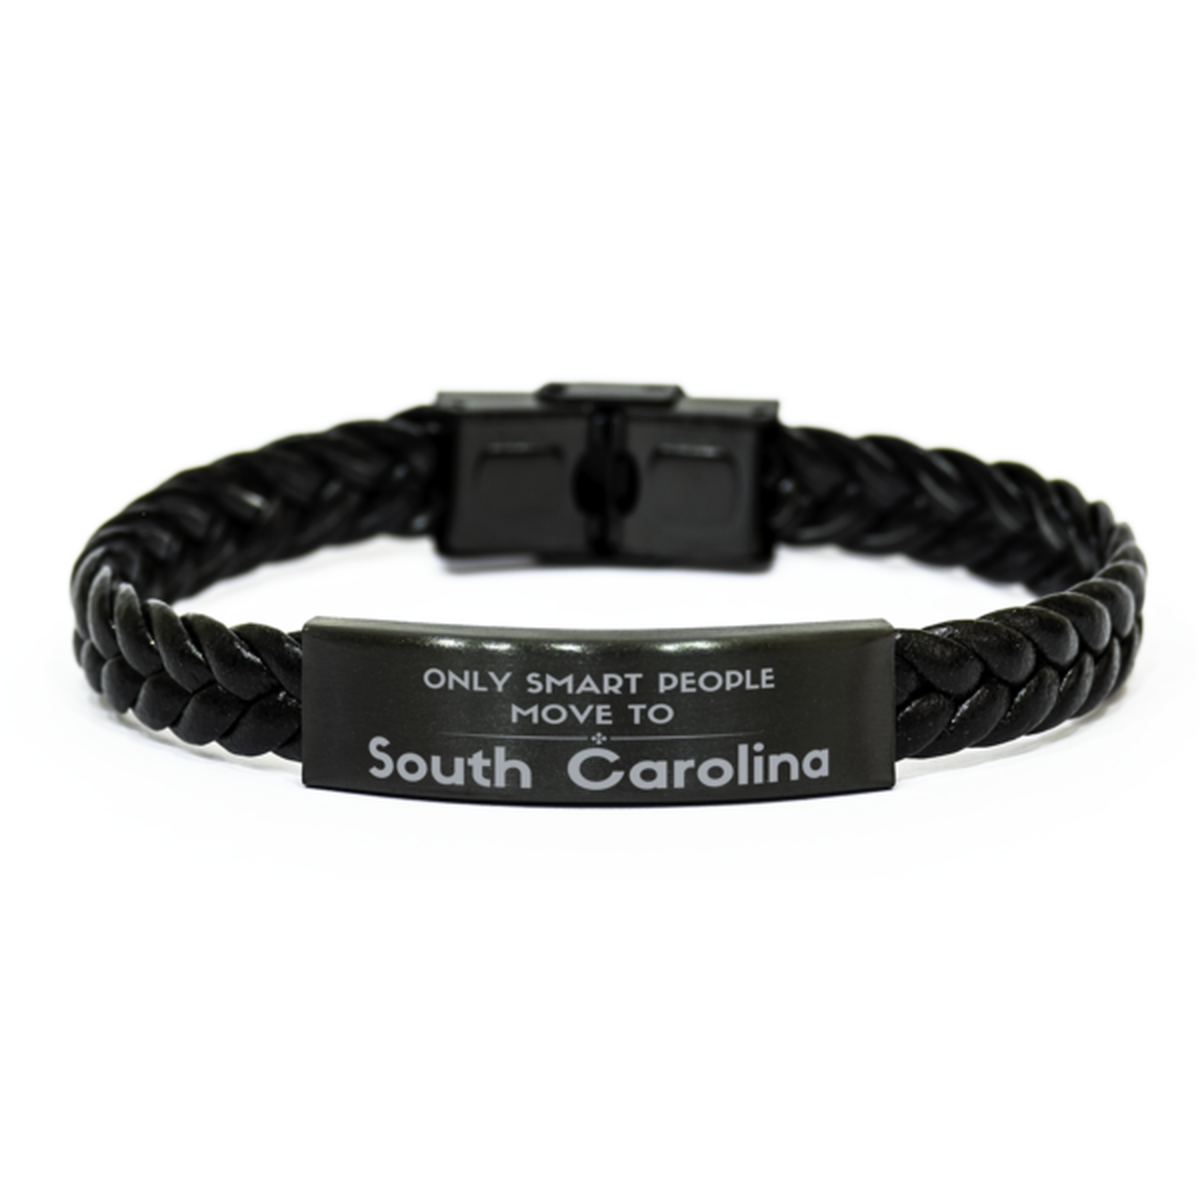 Only smart people move to South Carolina Braided Leather Bracelet, Gag Gifts For South Carolina, Move to South Carolina Gifts for Friends Coworker Funny Saying Quote